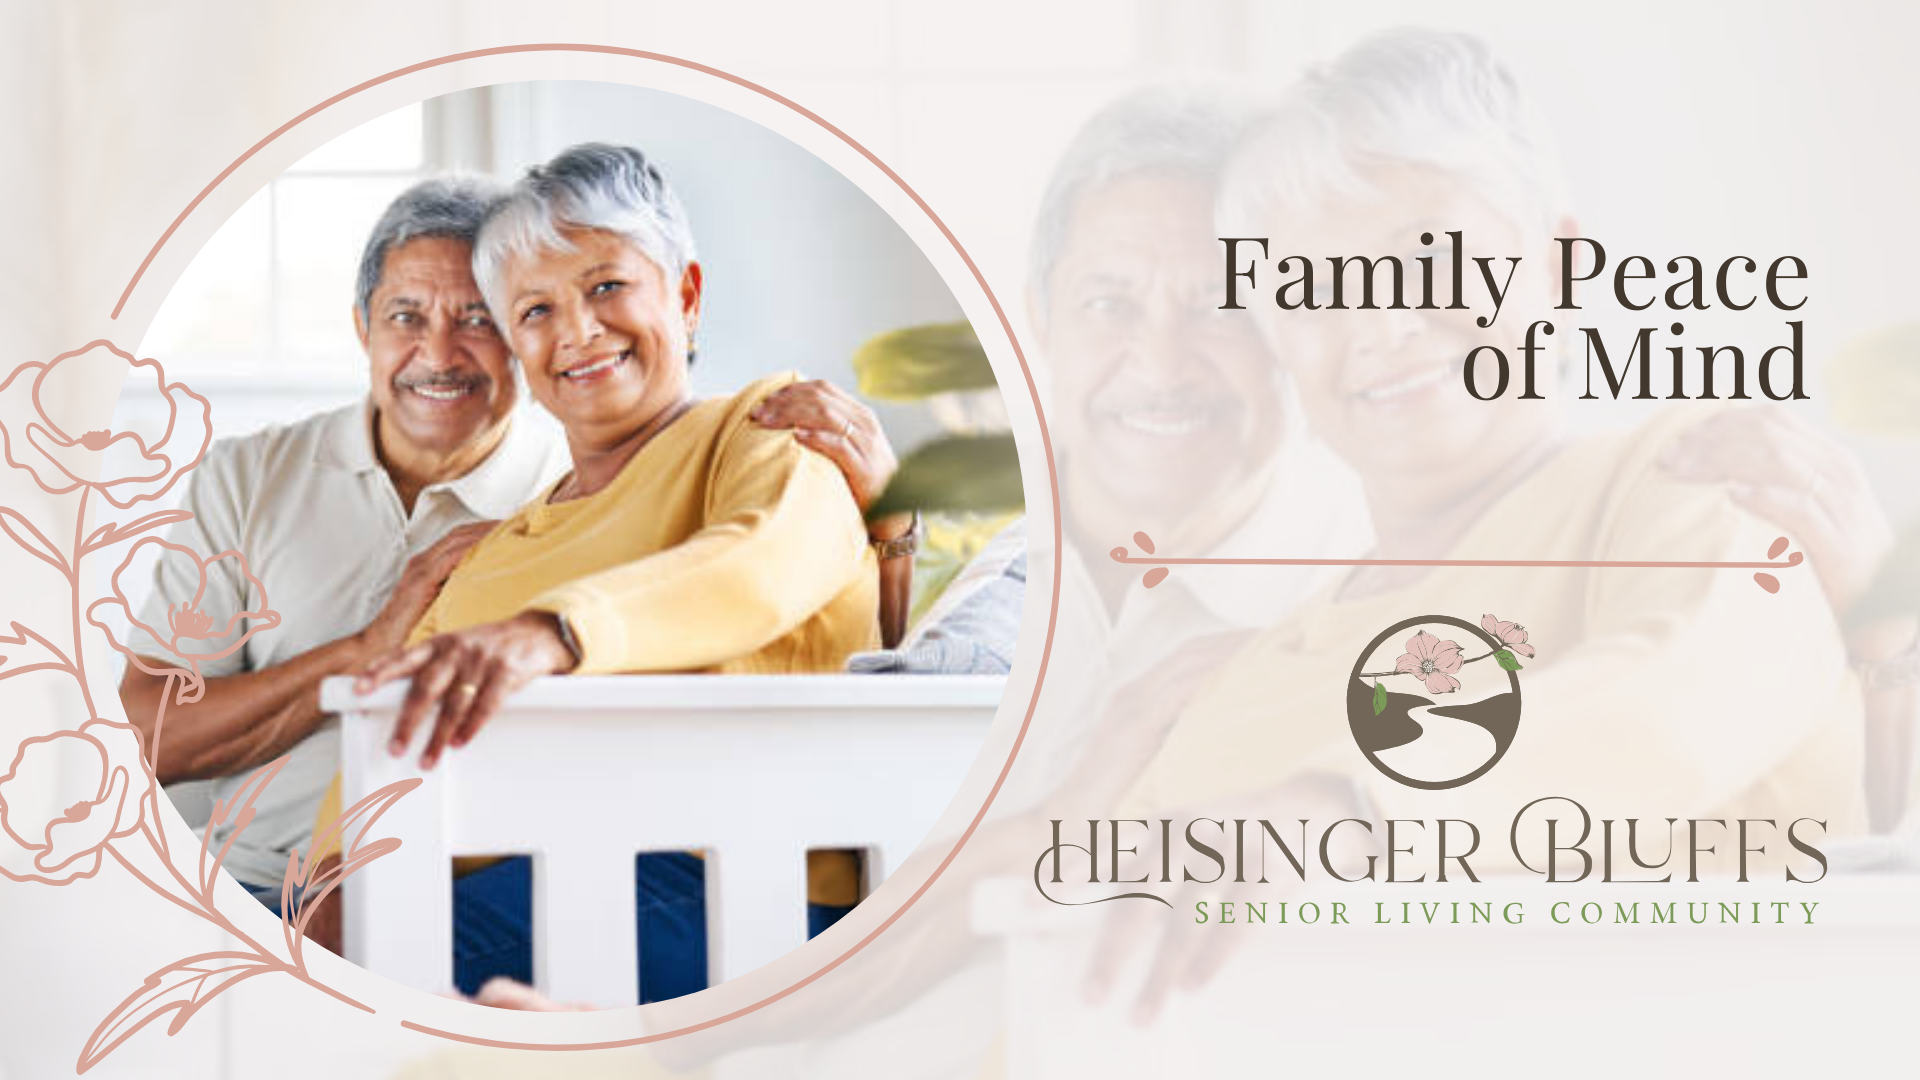 Independent Living community can provide peace of mind for your family